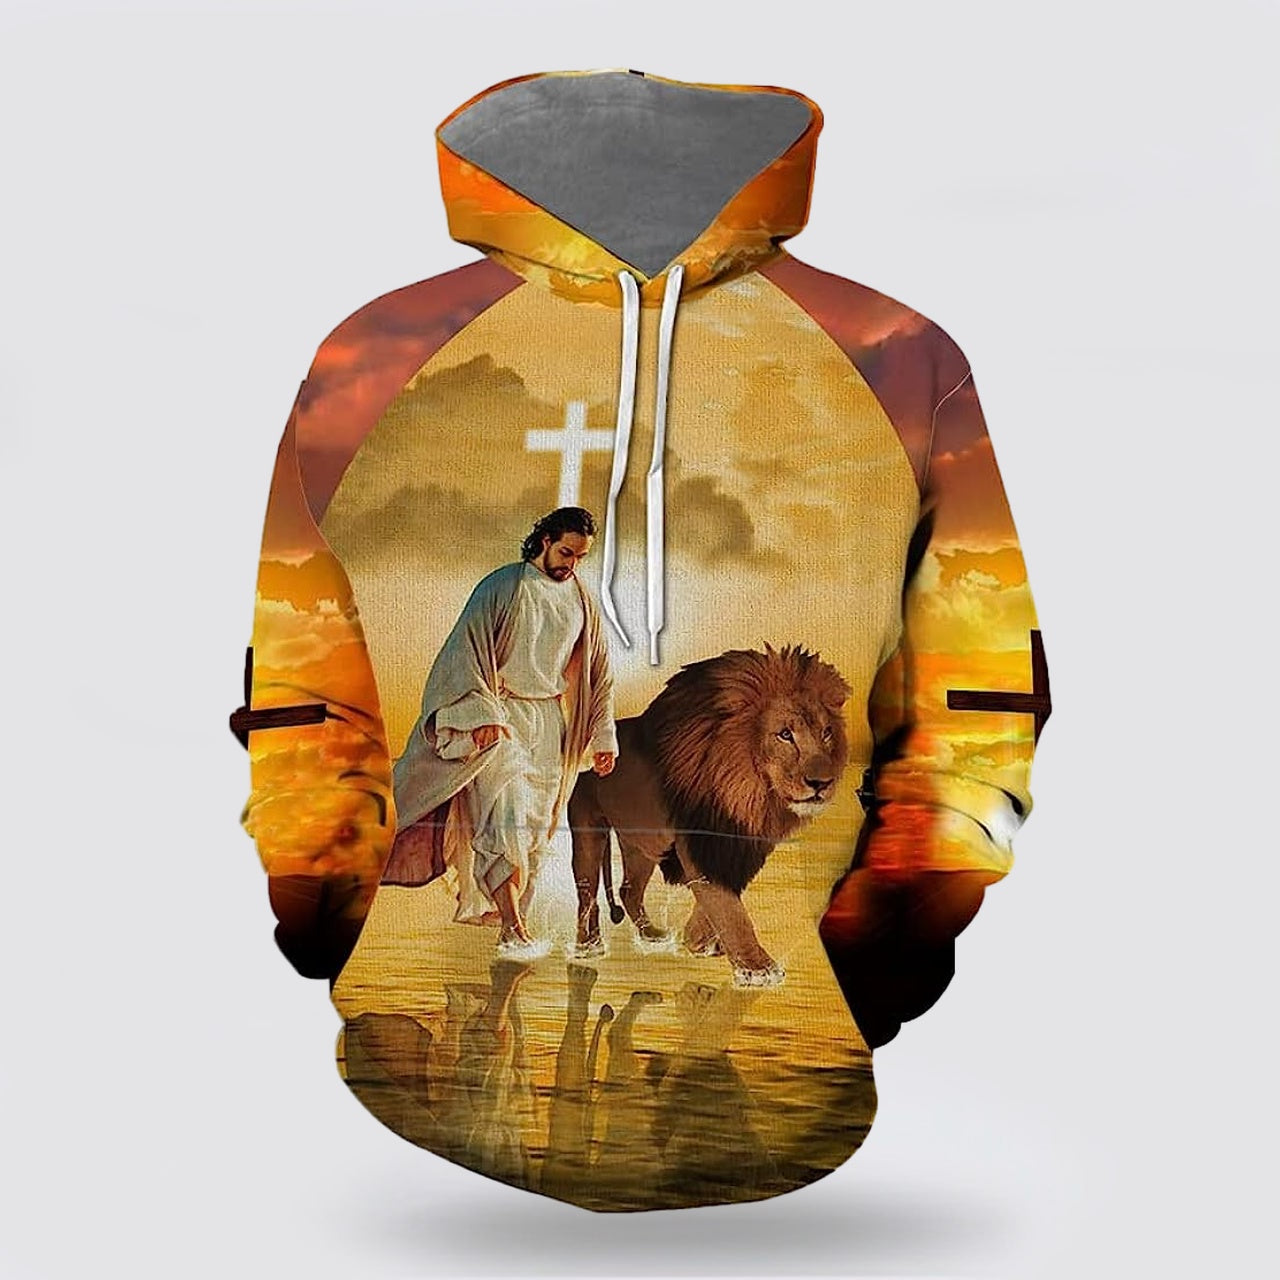 Jesus Walks With Lion Fall For Jesus He Never Leaves 3d Hoodies For Women Men - Christian Apparel Hoodies